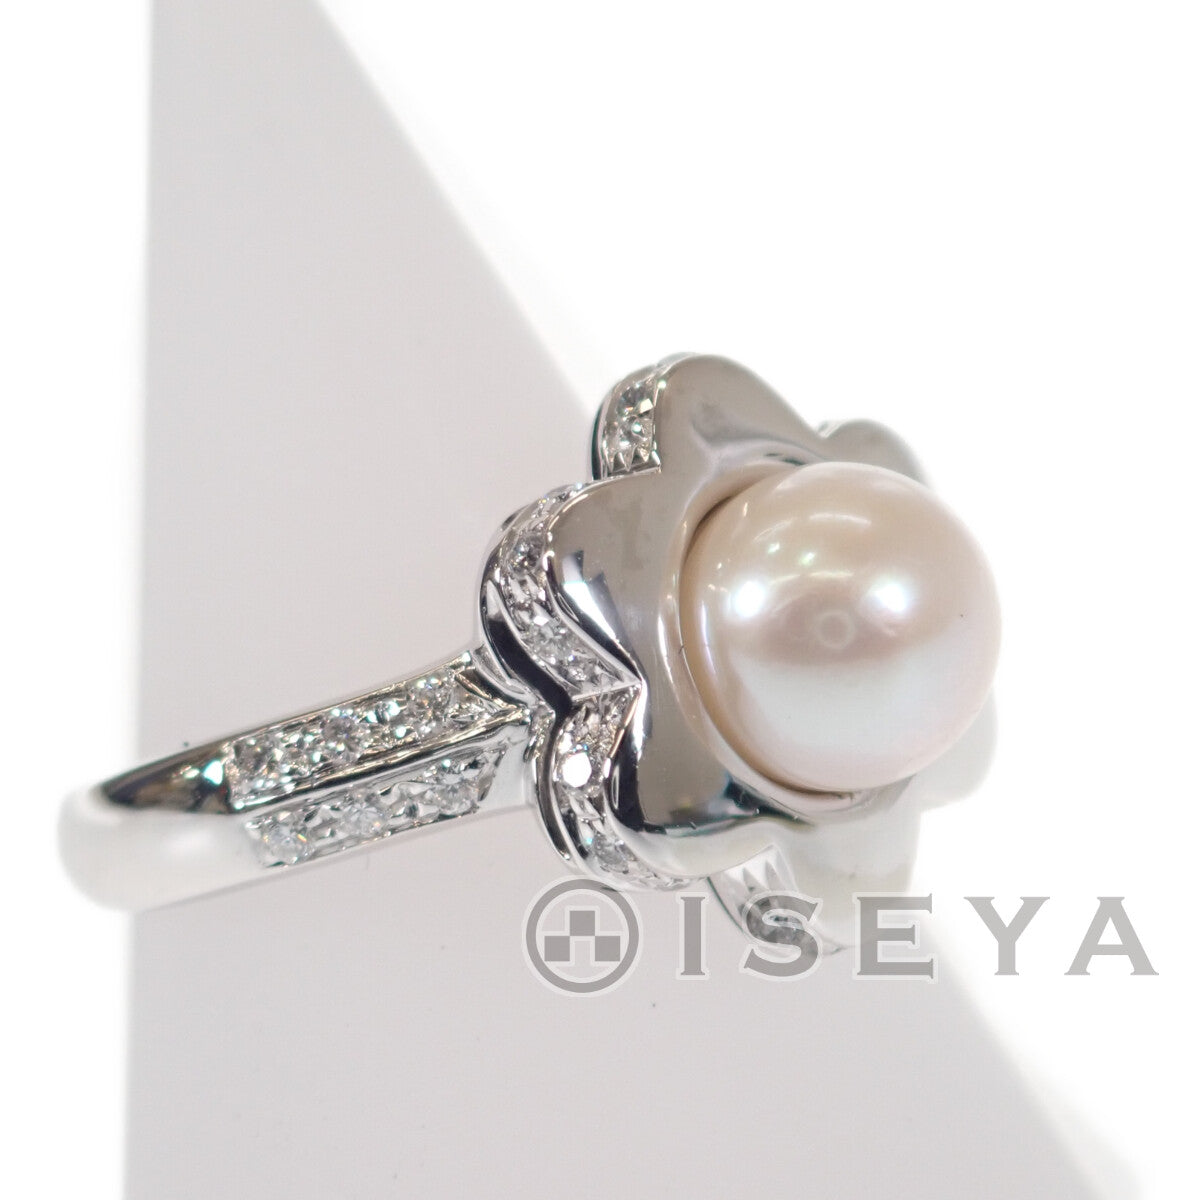 Ponte Vecchio Flower Motif Ring with Pearl & Diamond in K18 White Gold for Women, Size 9 (Used)